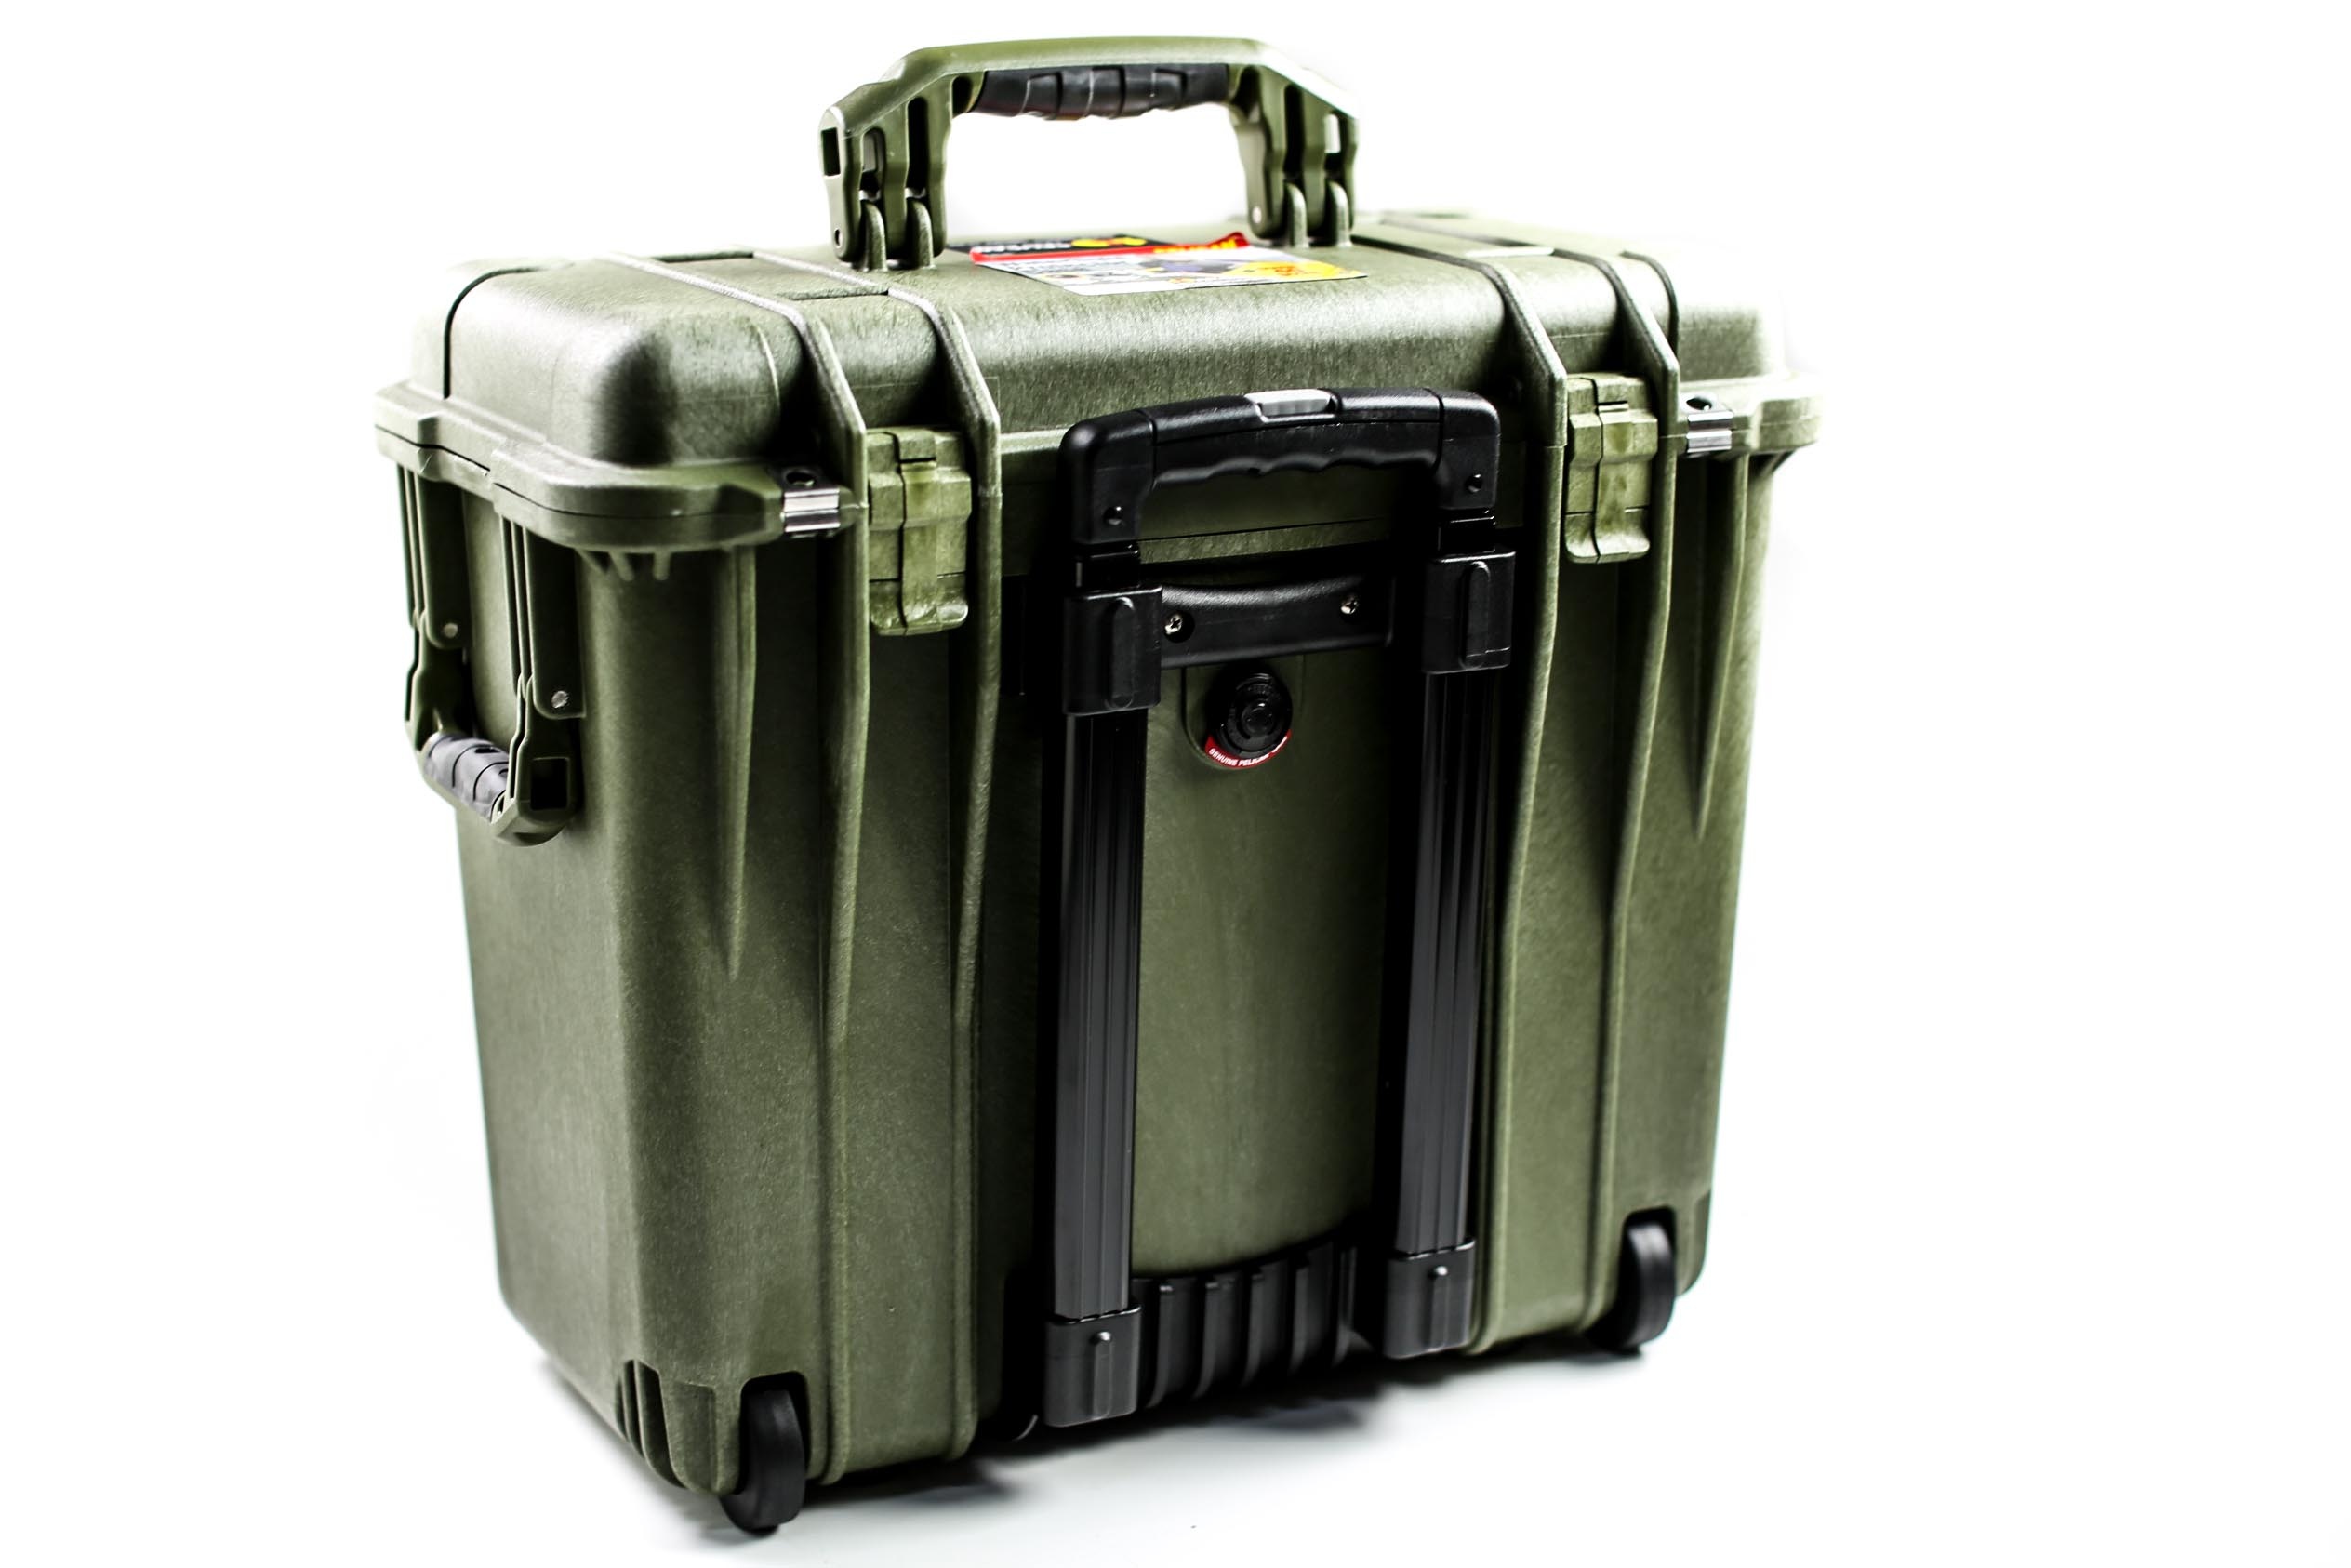 Pelican 1447 Top Loader Case with Office Dividers (Olive Drab Green)